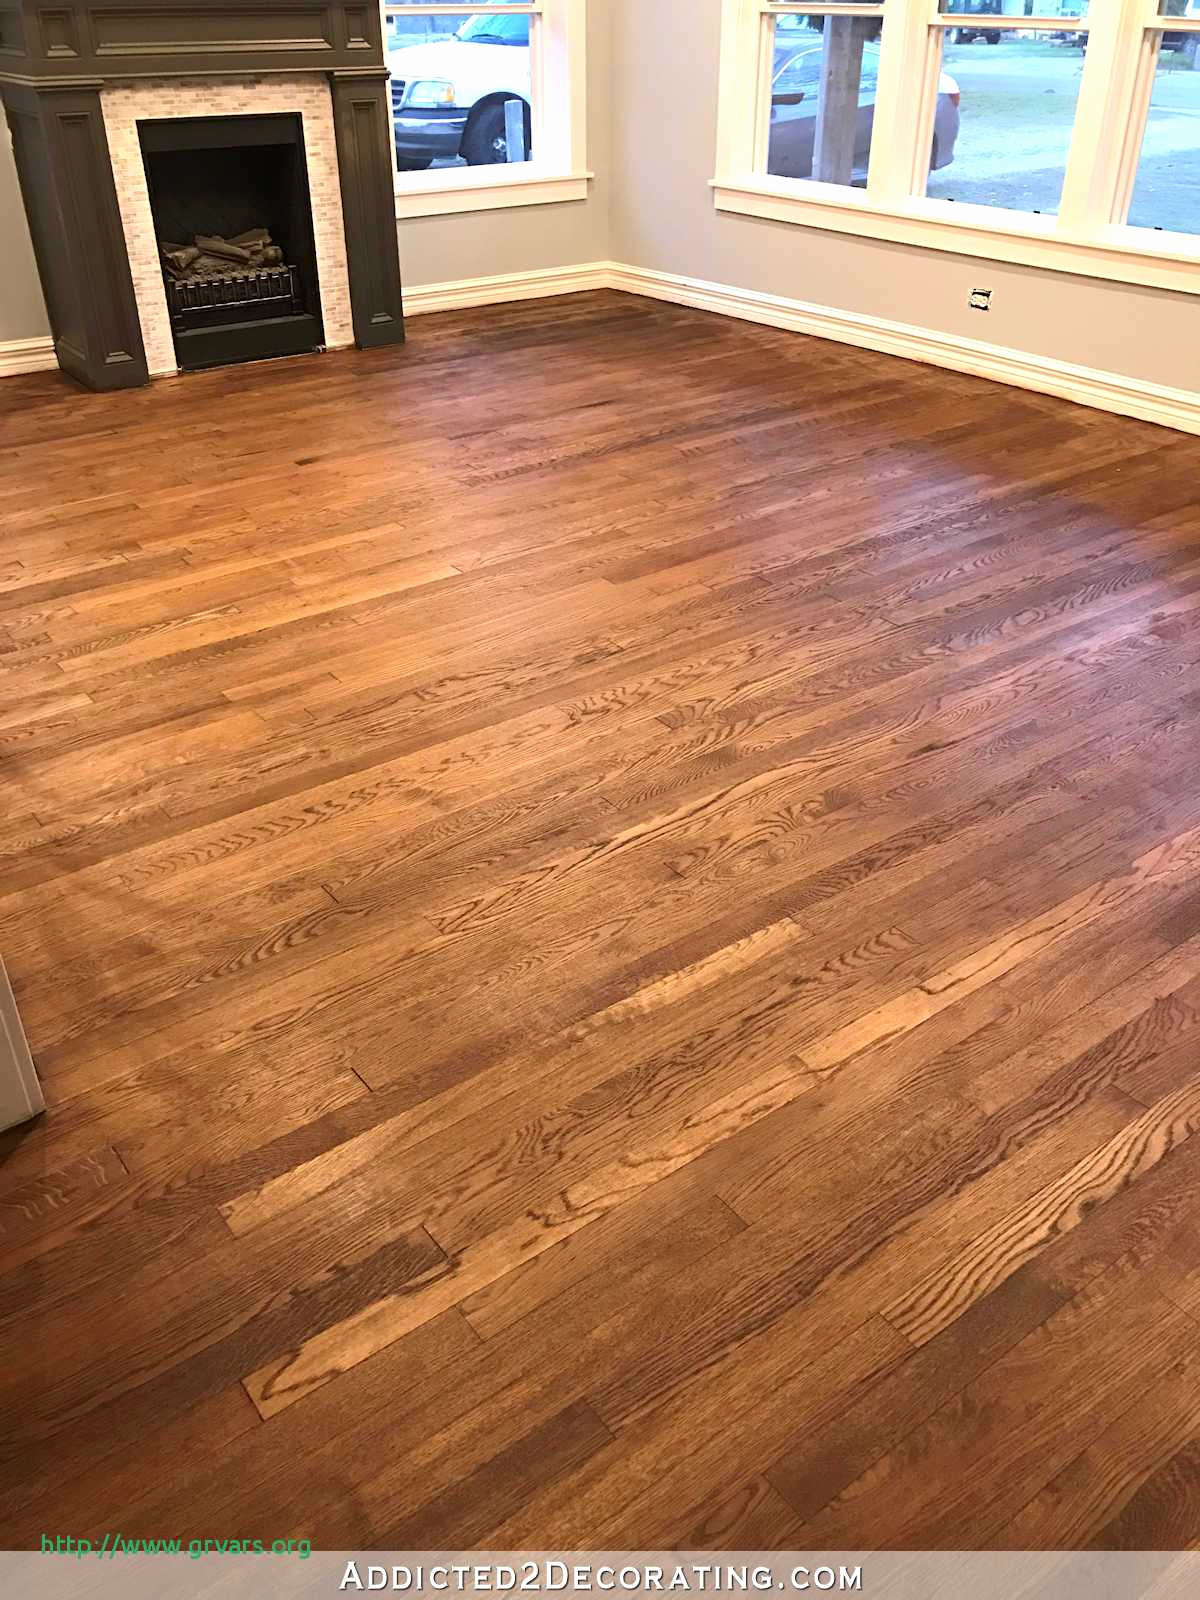 cost to finish new hardwood floors of 60 elegant the best of stained concrete floor cost calculator throughout staining red oak hardwood floors 8a living room and entryway 25 meilleur de cost to restain hardwood floors from stained